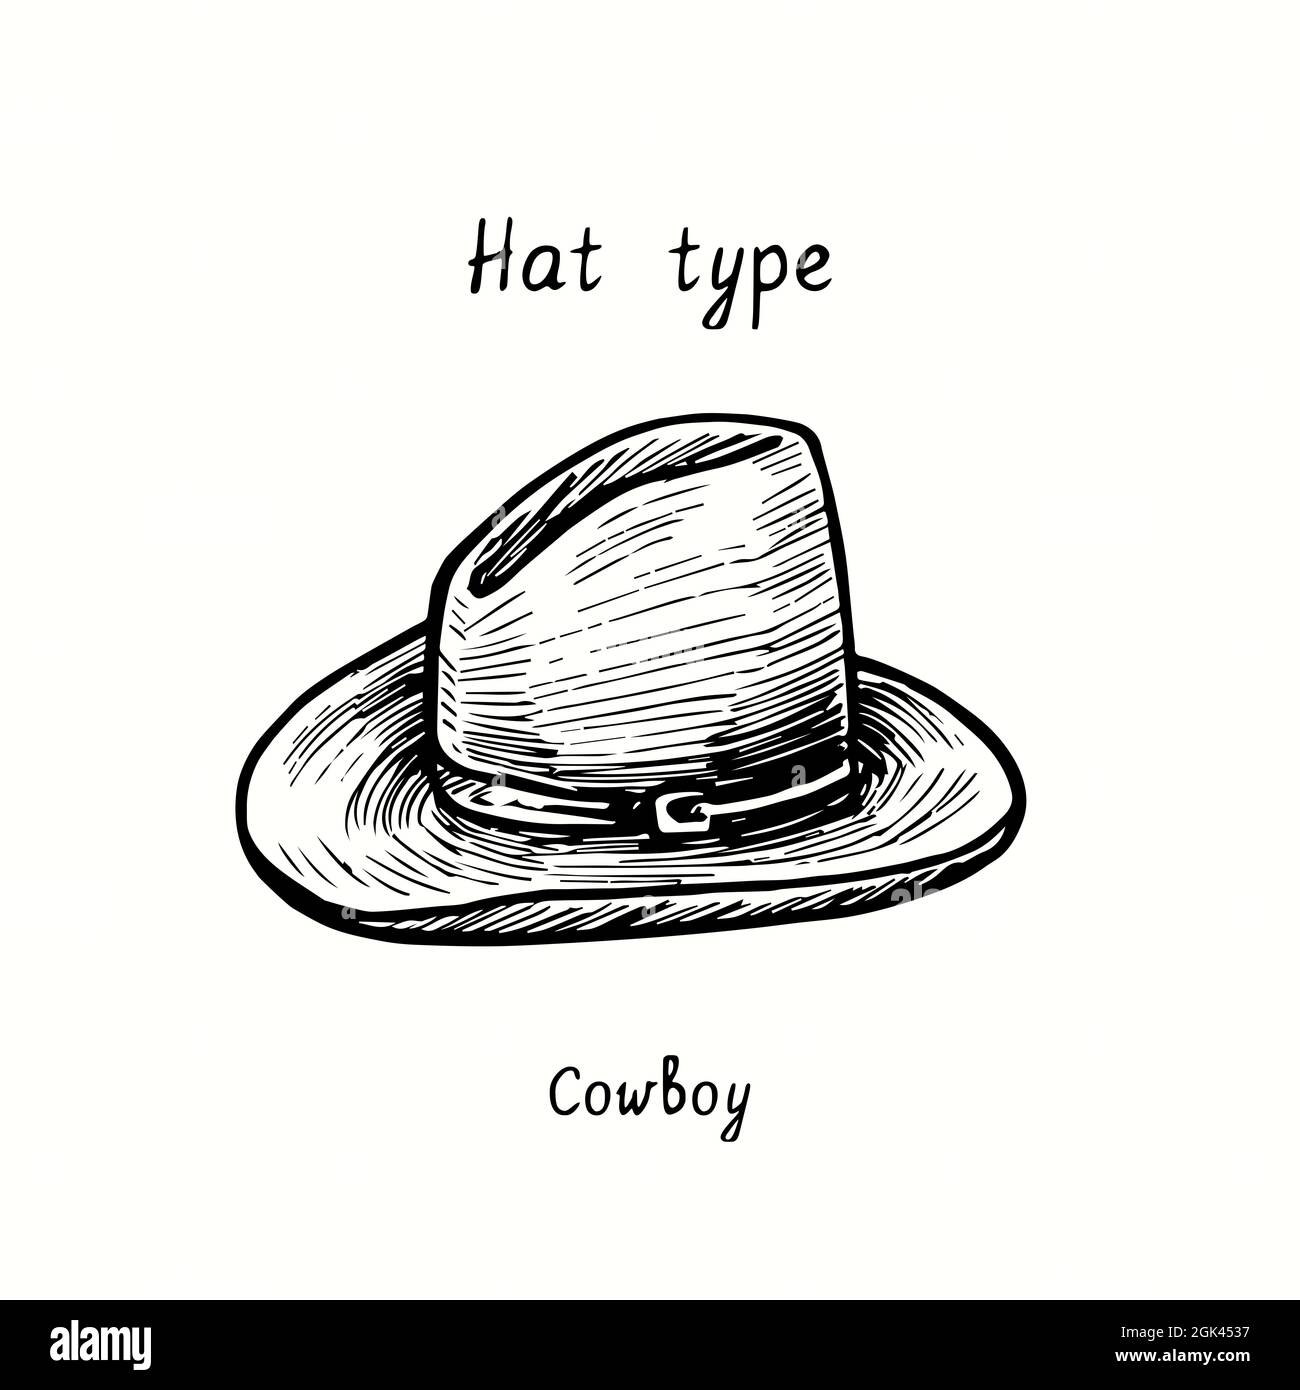 Hat type, cowboy hat. Ink black and white drawing outline illustration  Stock Photo - Alamy